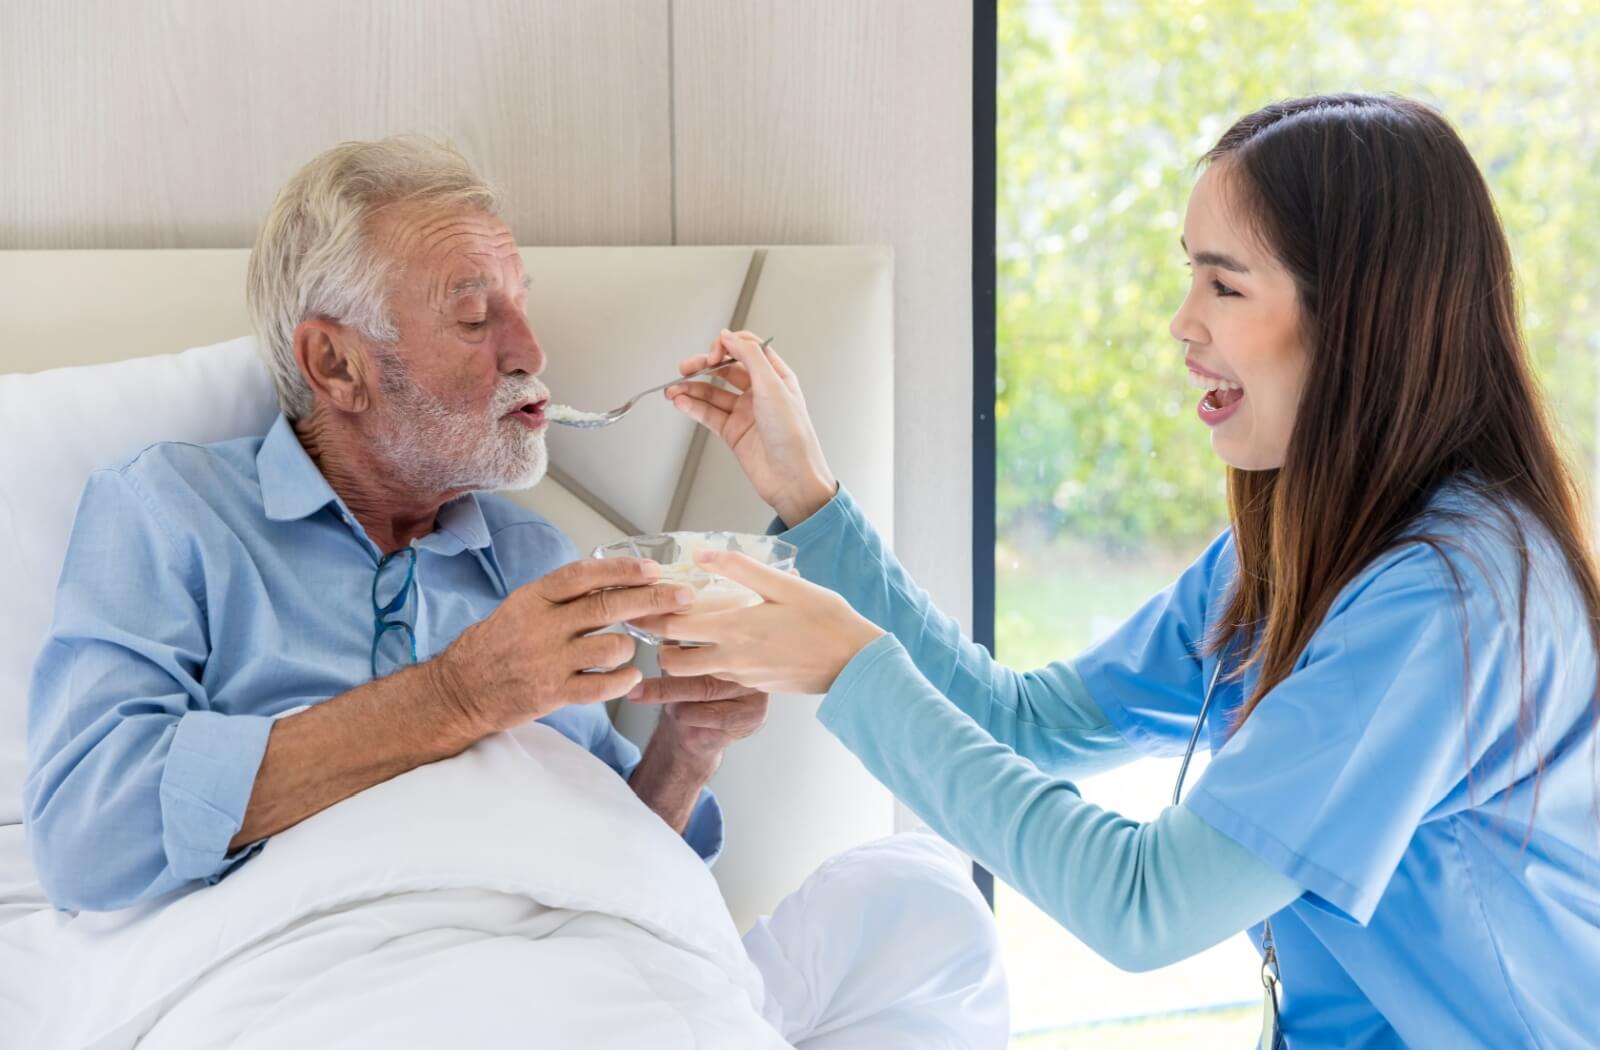 A personal care home staff feeding a resident.